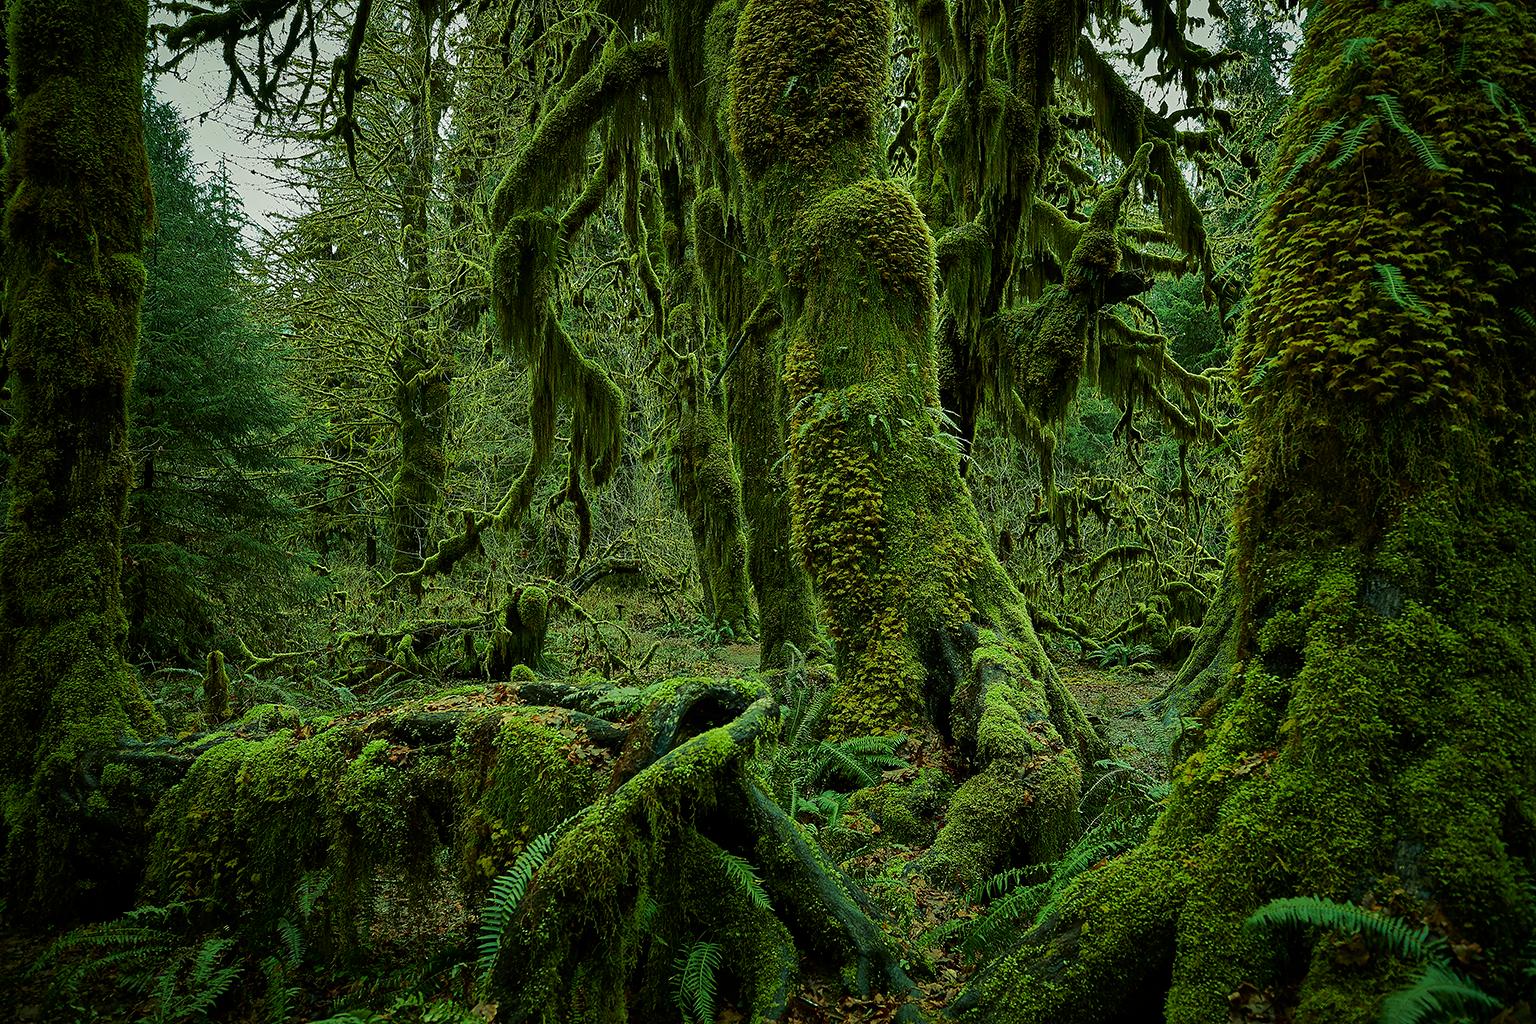 Olympic National Park No. 4 - Green Color Photograph by Chris Gordaneer